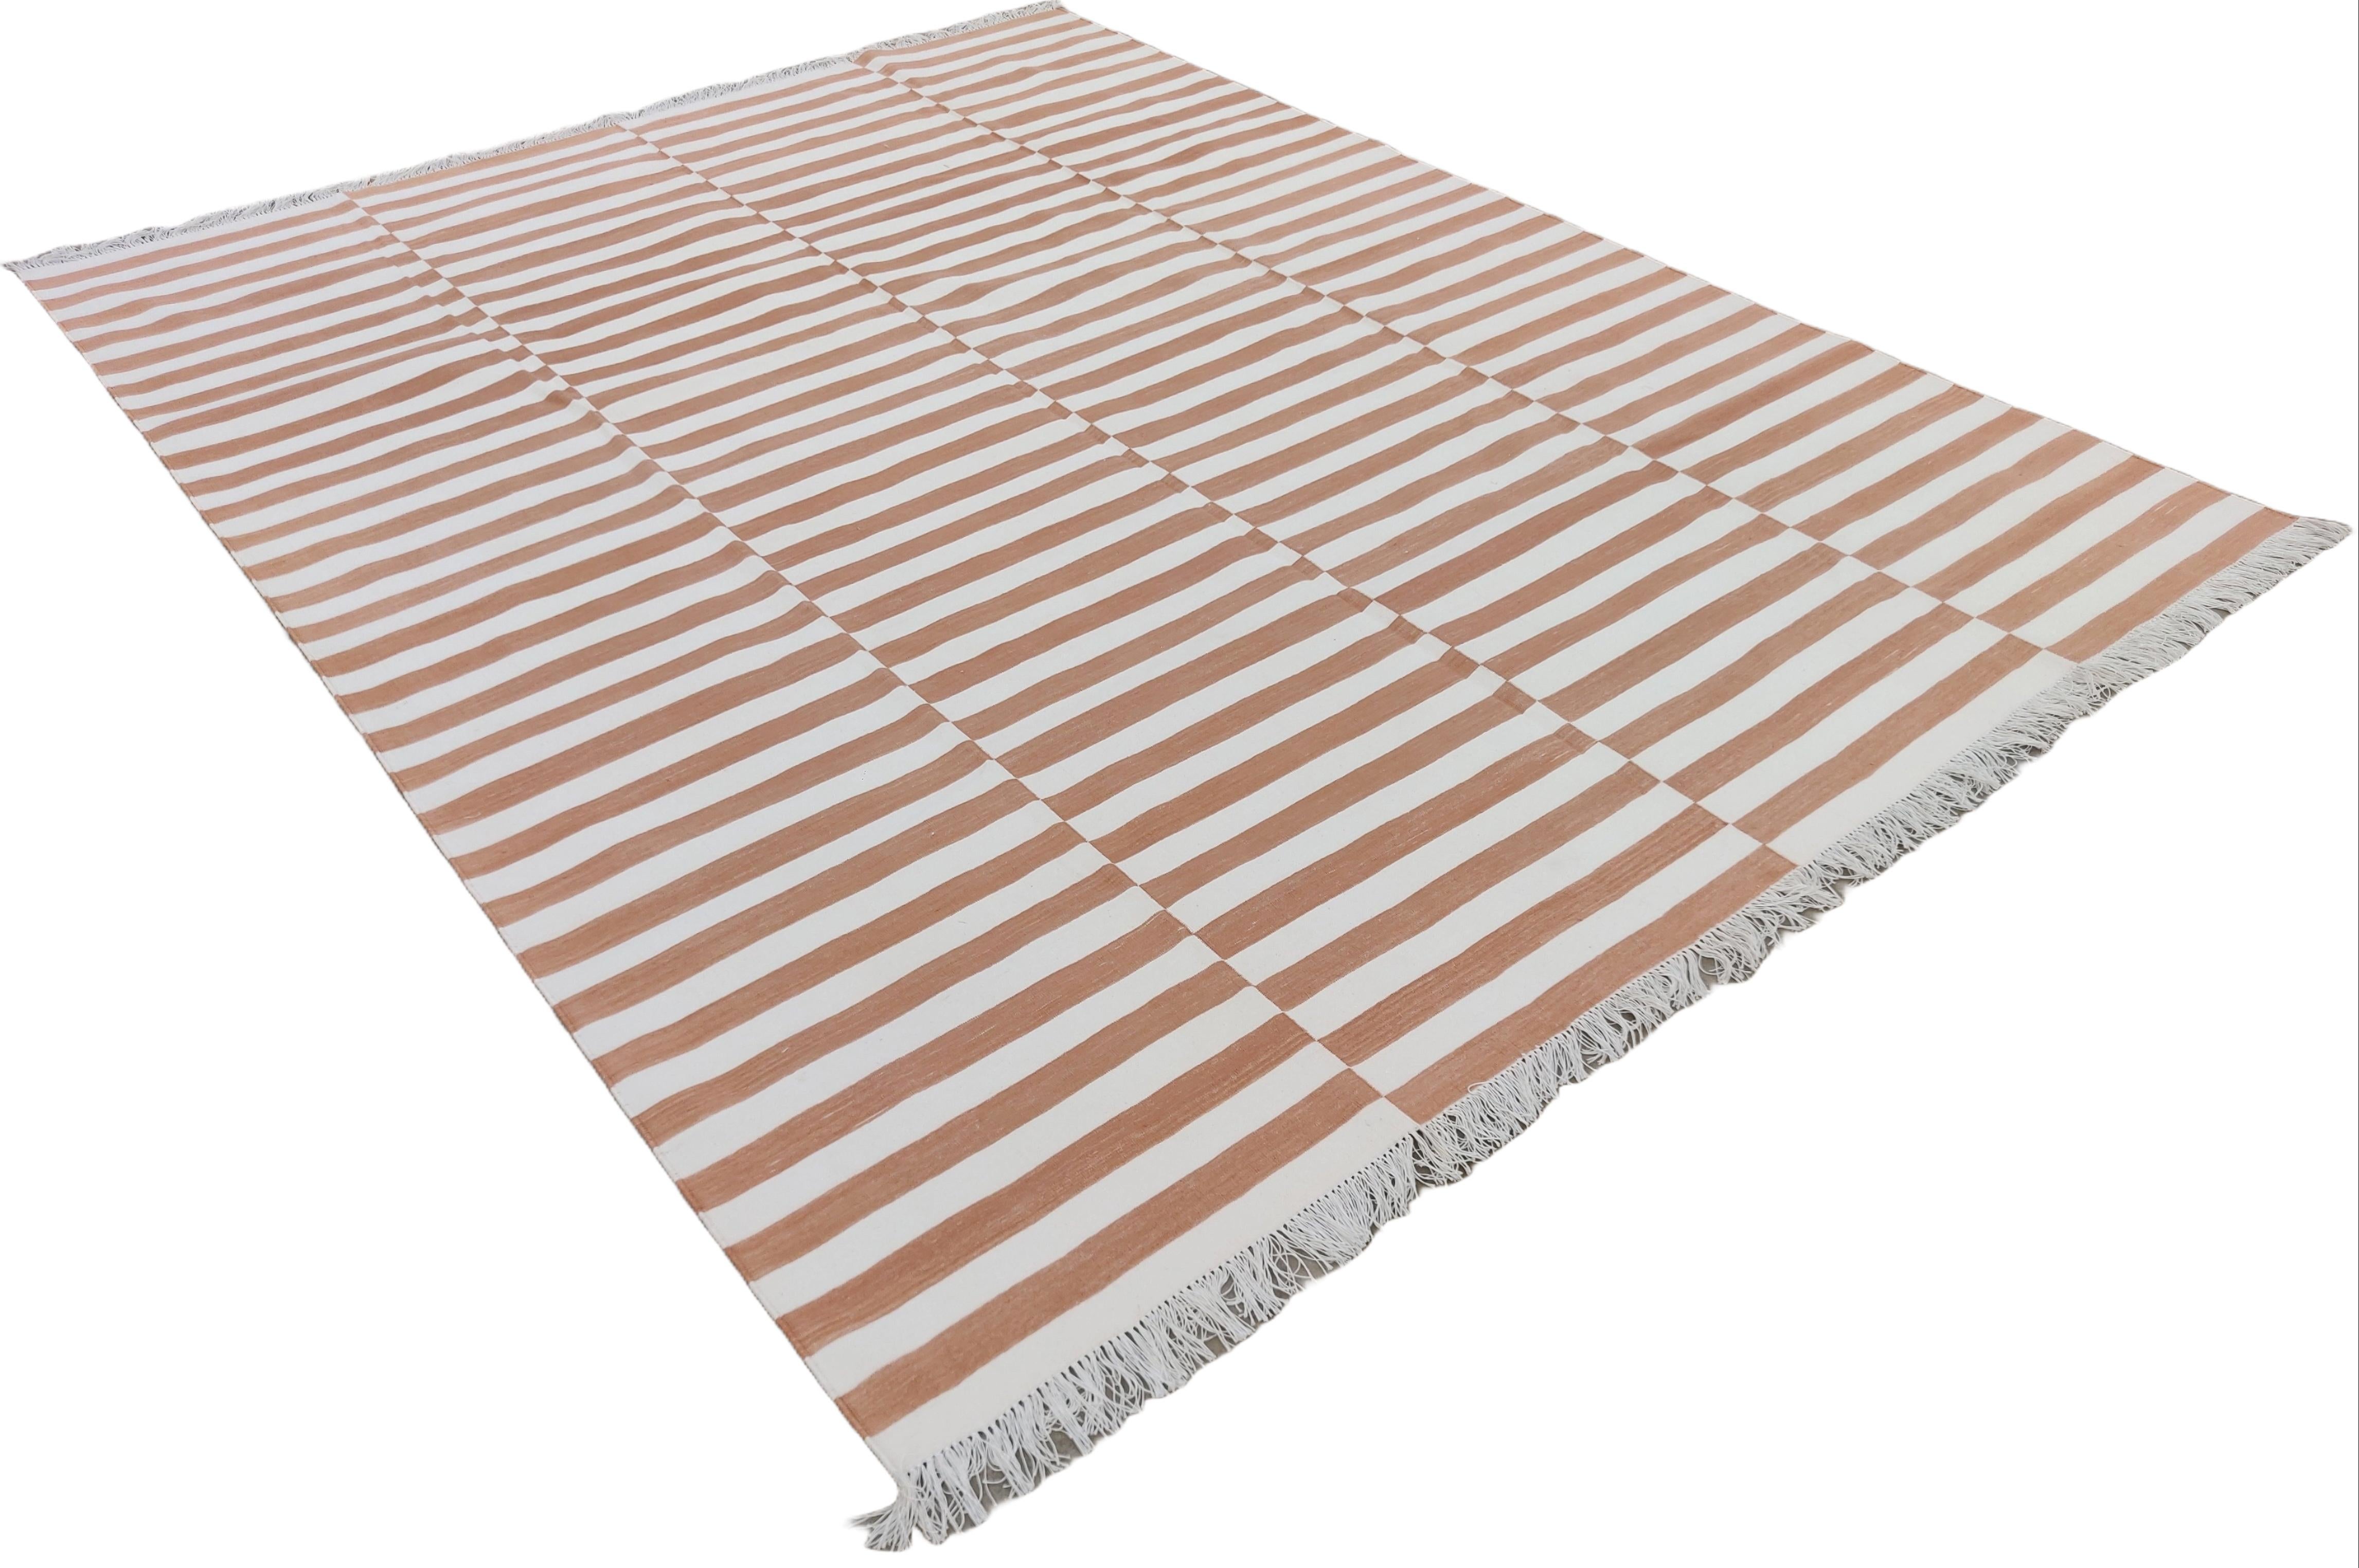 Cotton Vegetable Dyed Reversible Tan And White Striped Indian Dhurrie Rug - 8'x10'
These special flat-weave dhurries are hand-woven with 15 ply 100% cotton yarn. Due to the special manufacturing techniques used to create our rugs, the size and color